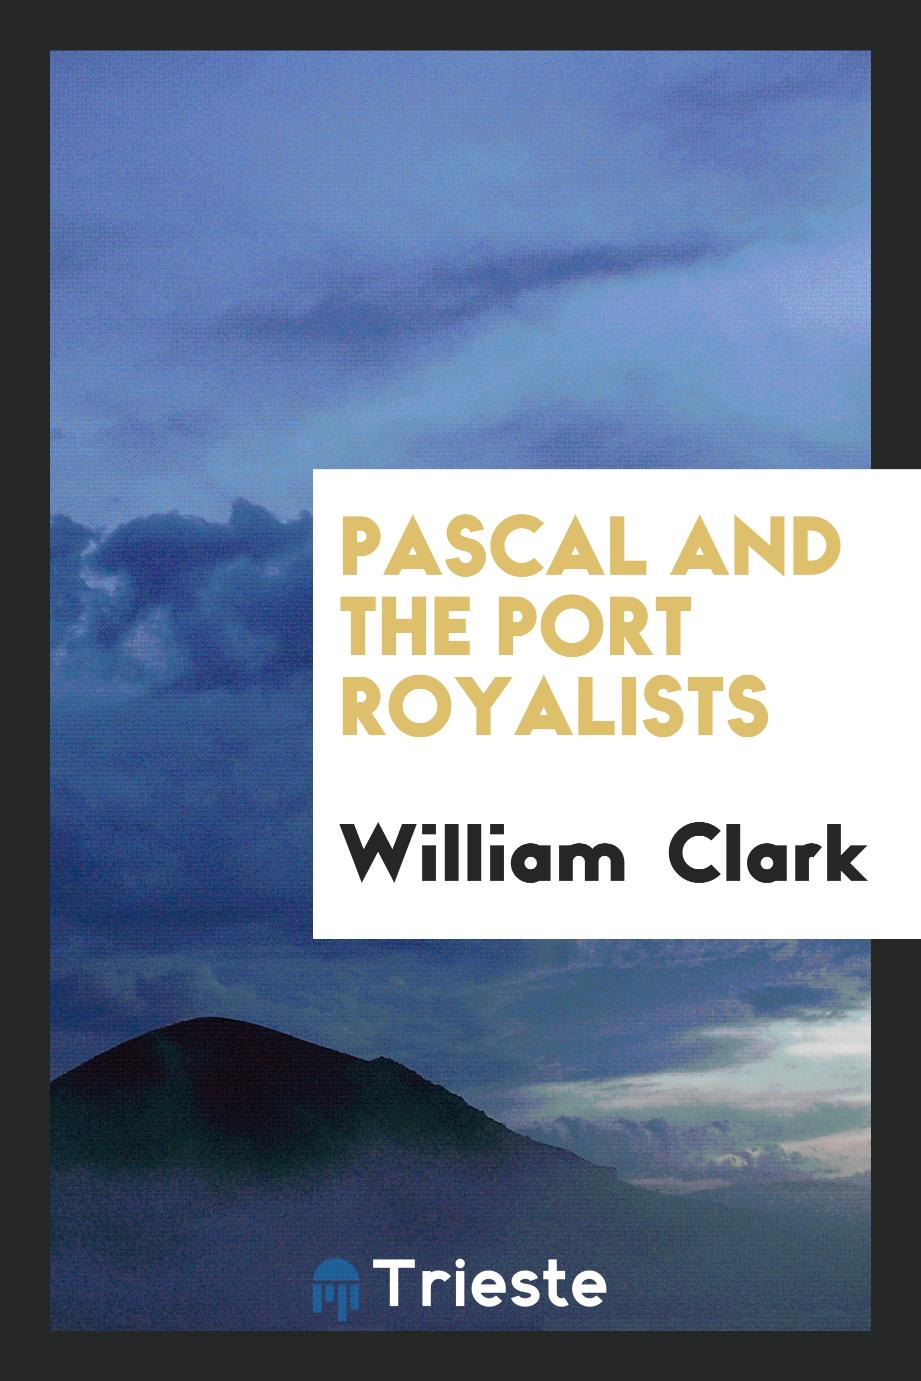 Pascal and the Port Royalists